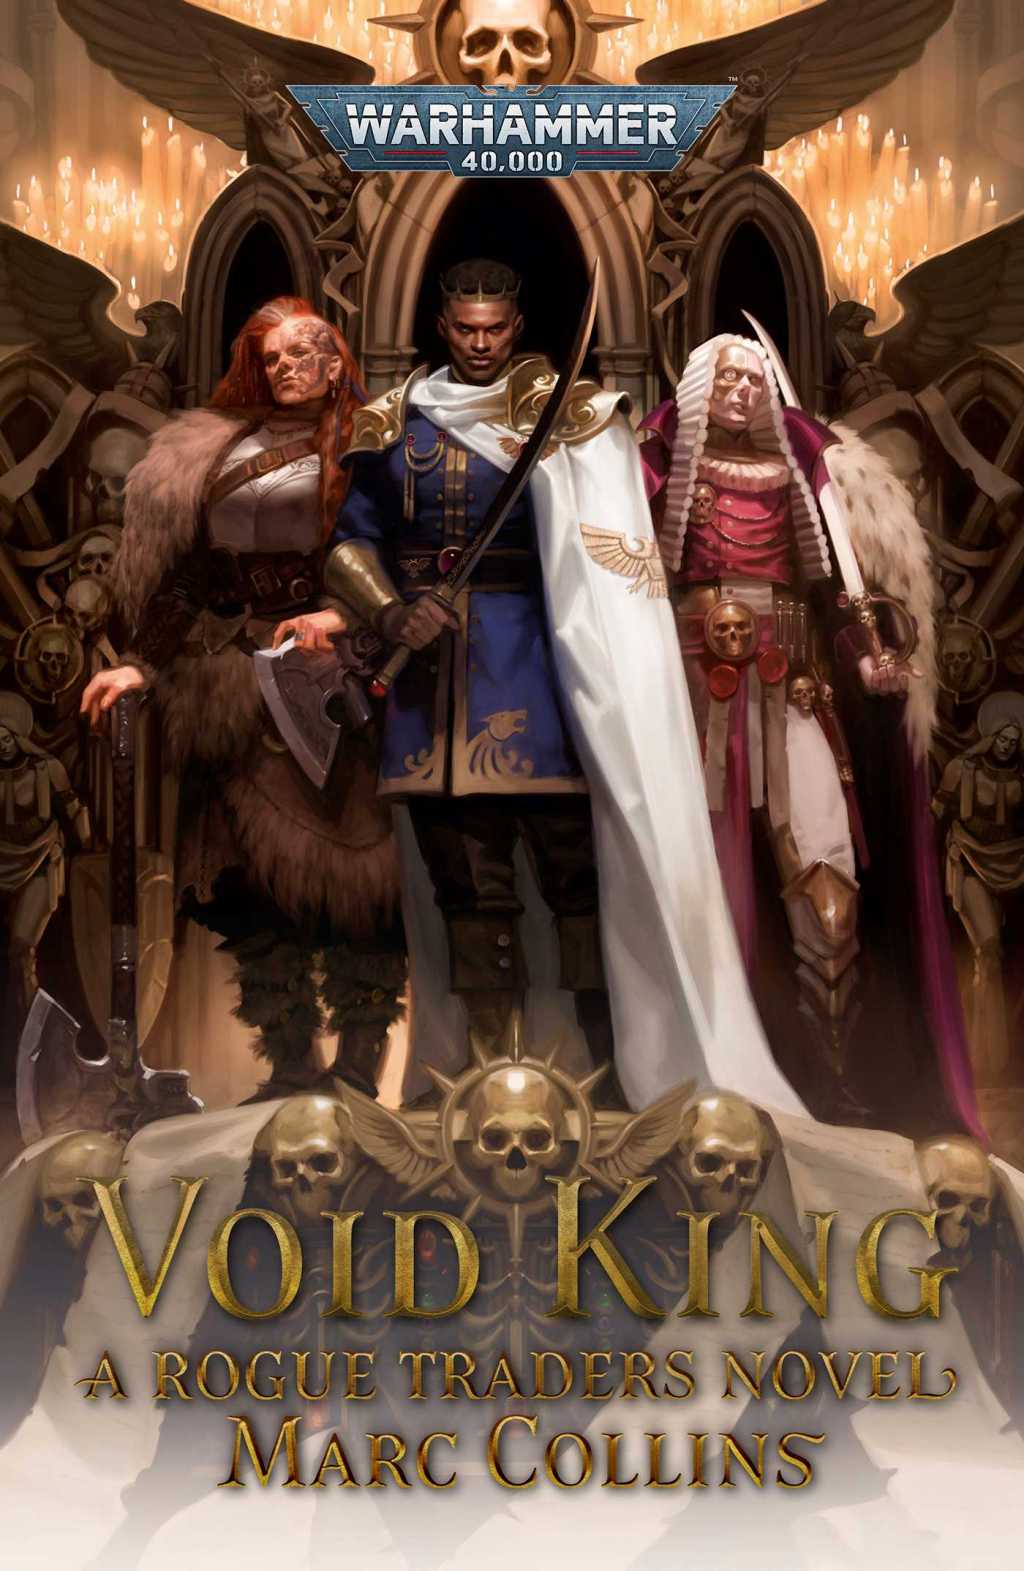 BOOK REVIEW: Void King, by Marc Collins